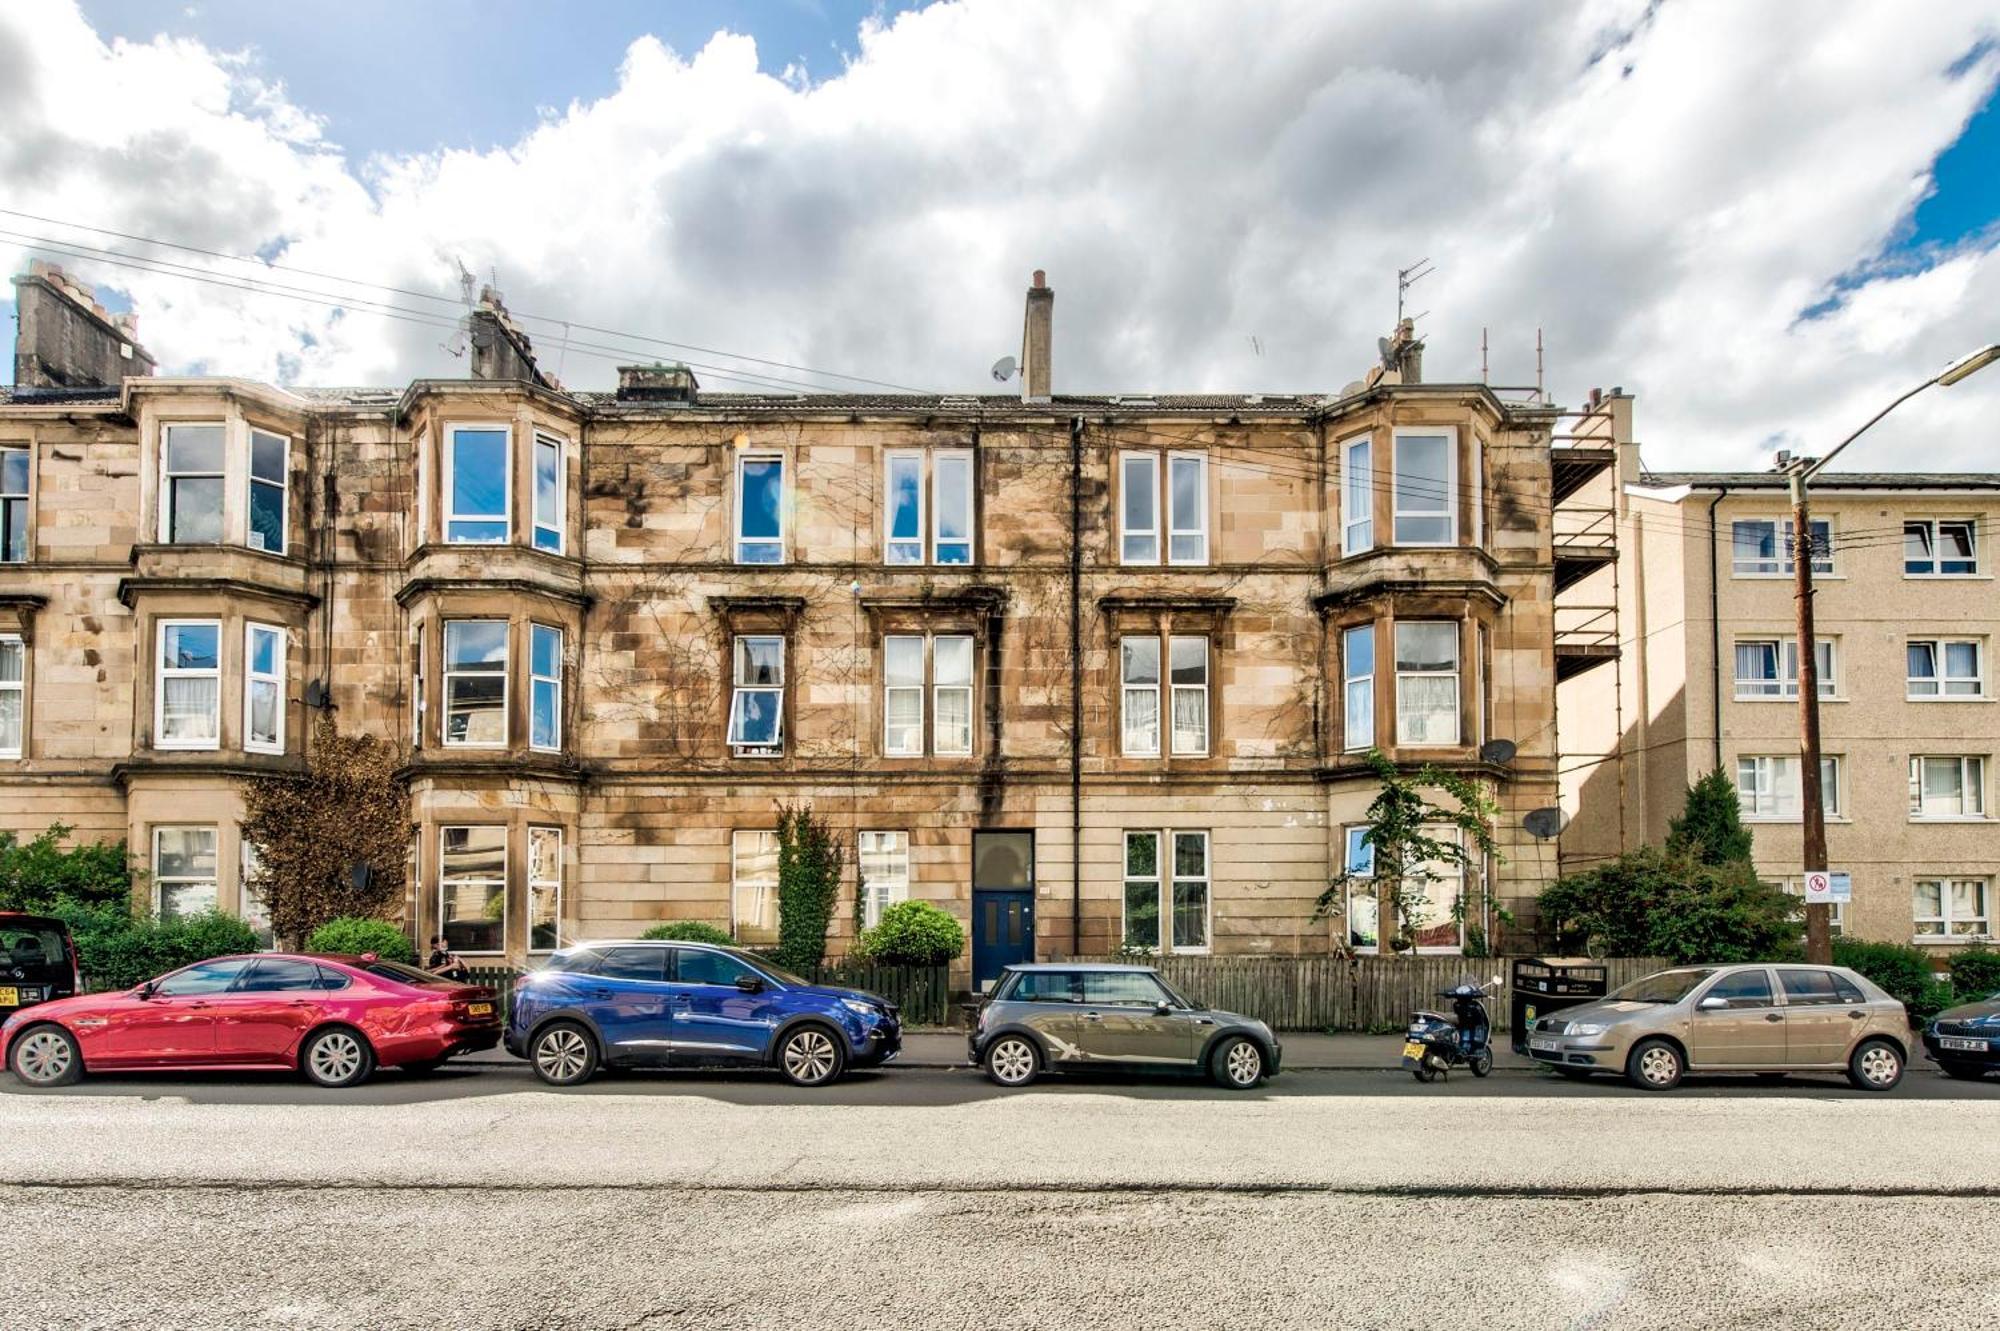 Stunning 5 Bedroom Apt, Close To City Centre, Sec, Hydro And Motorway Glasgow Bagian luar foto